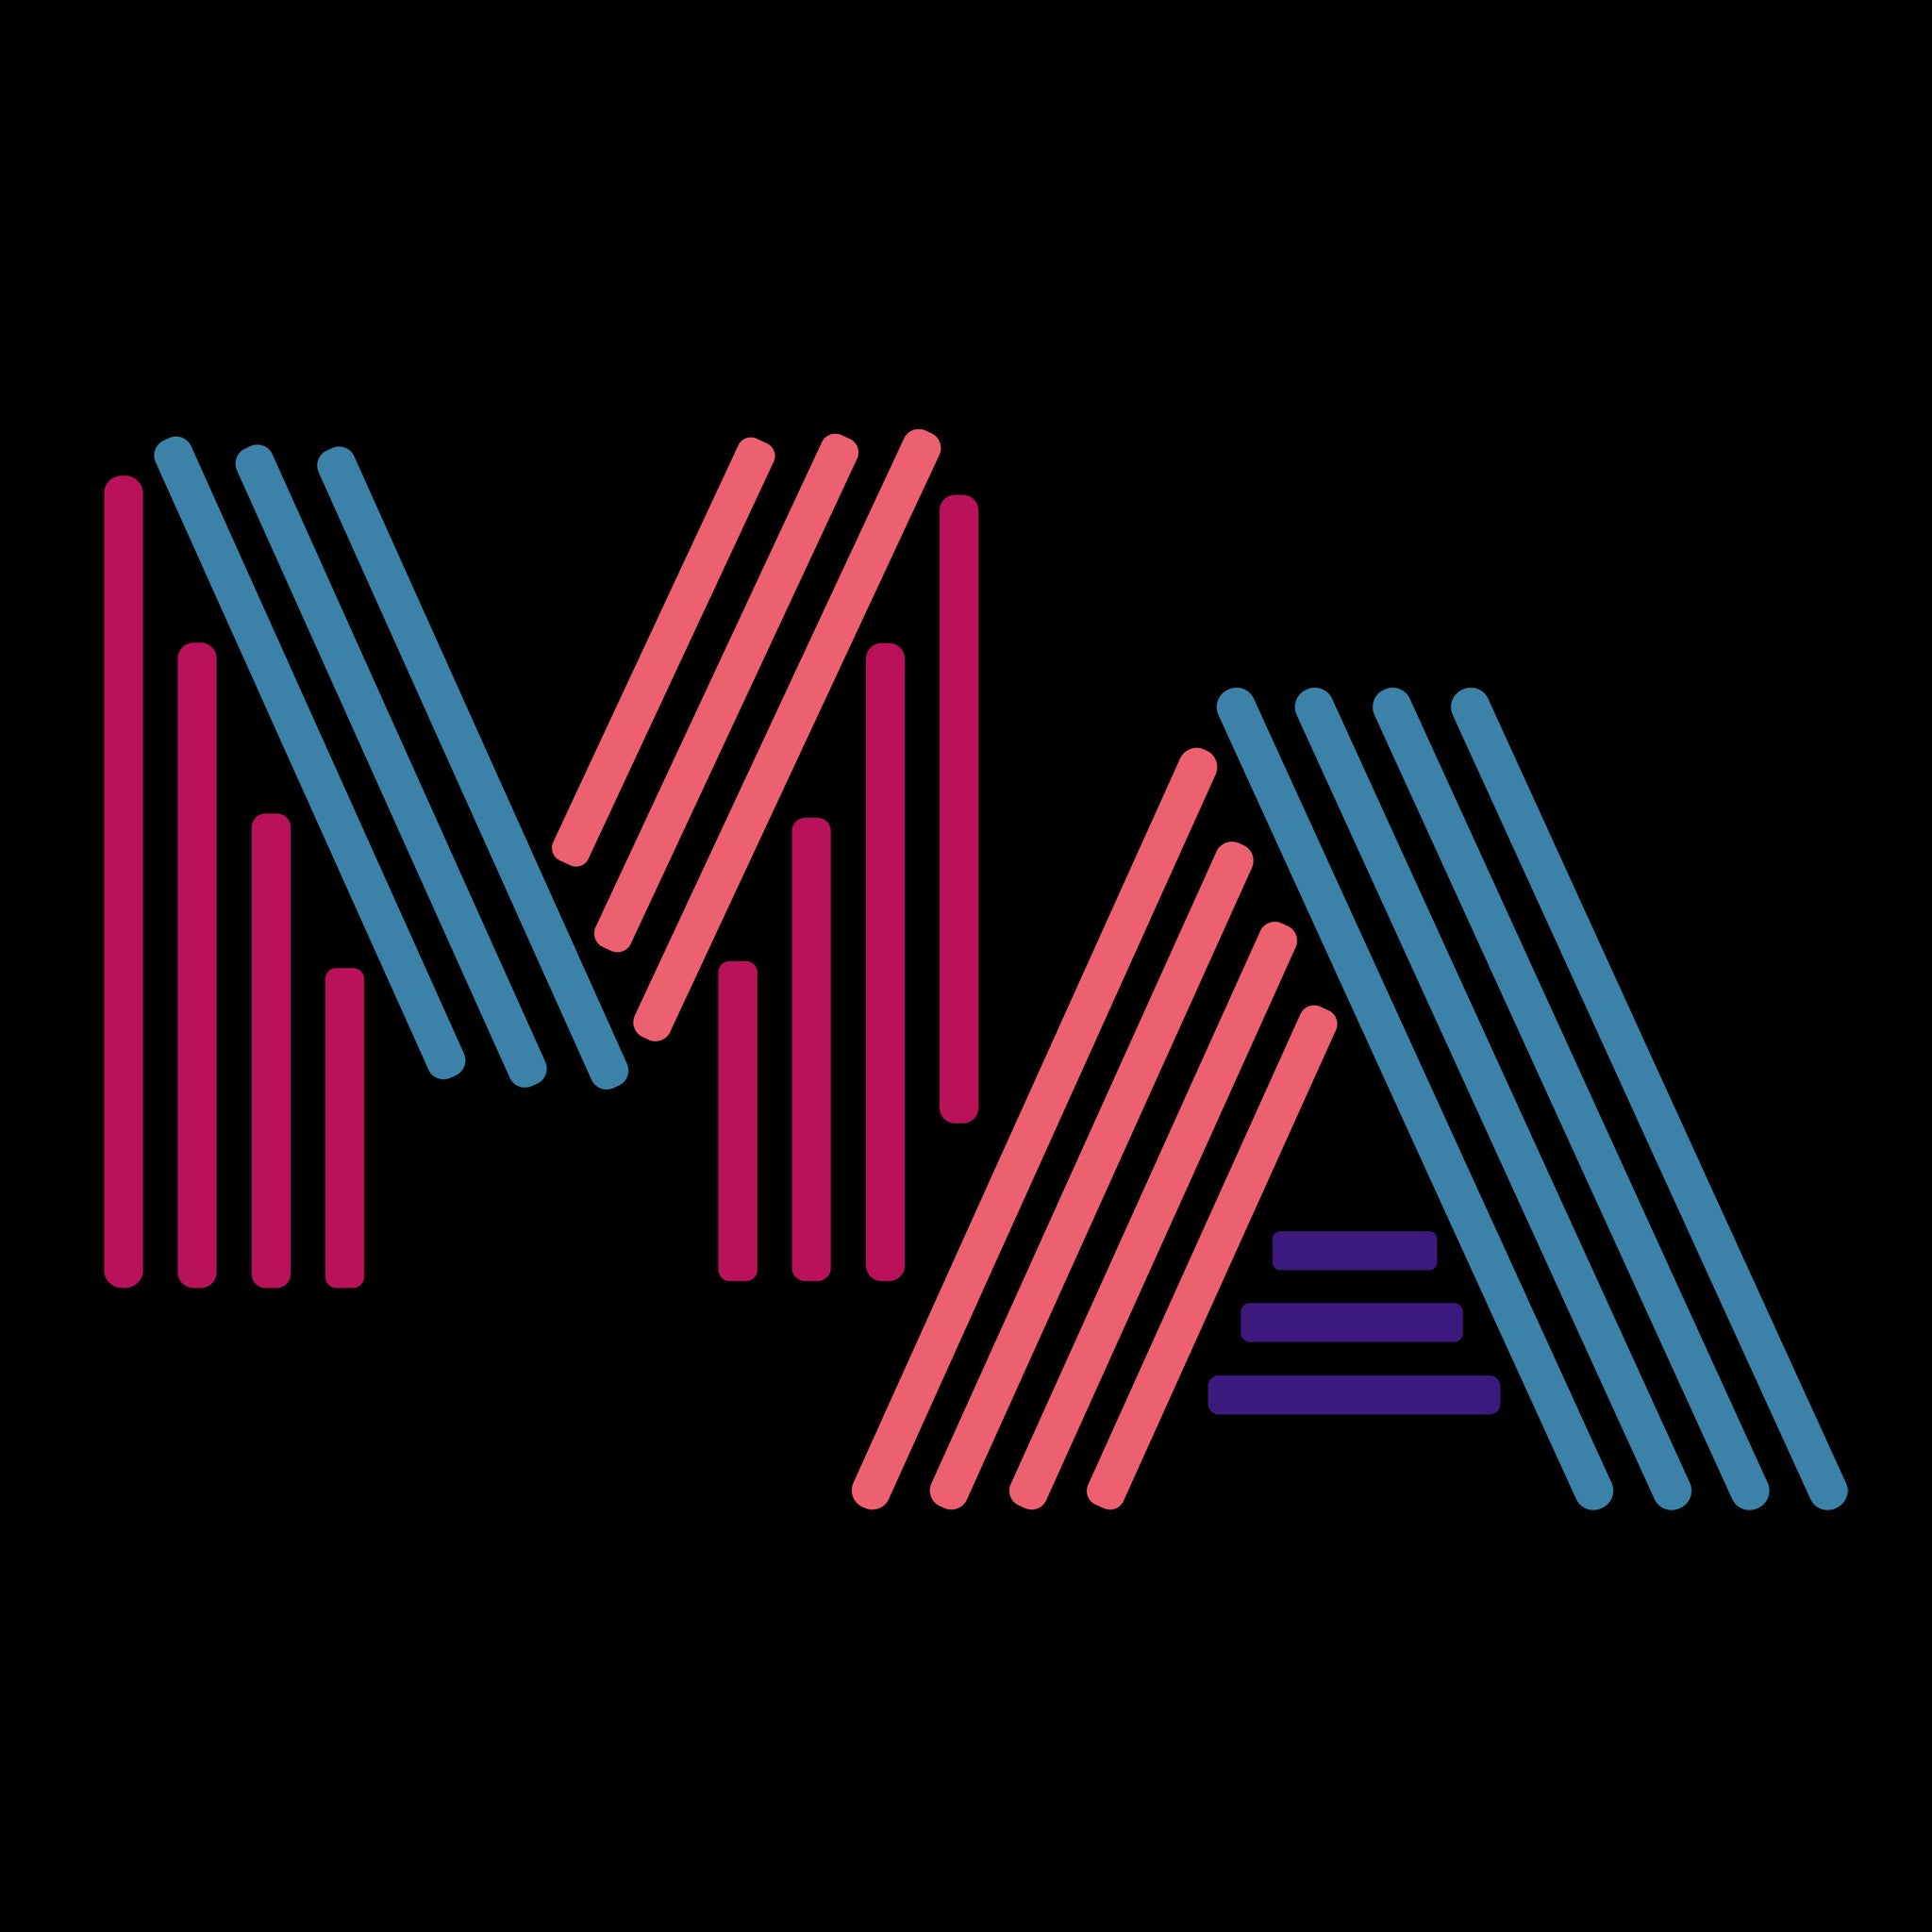 MA in neon 90s style lettering on black background massachusetts